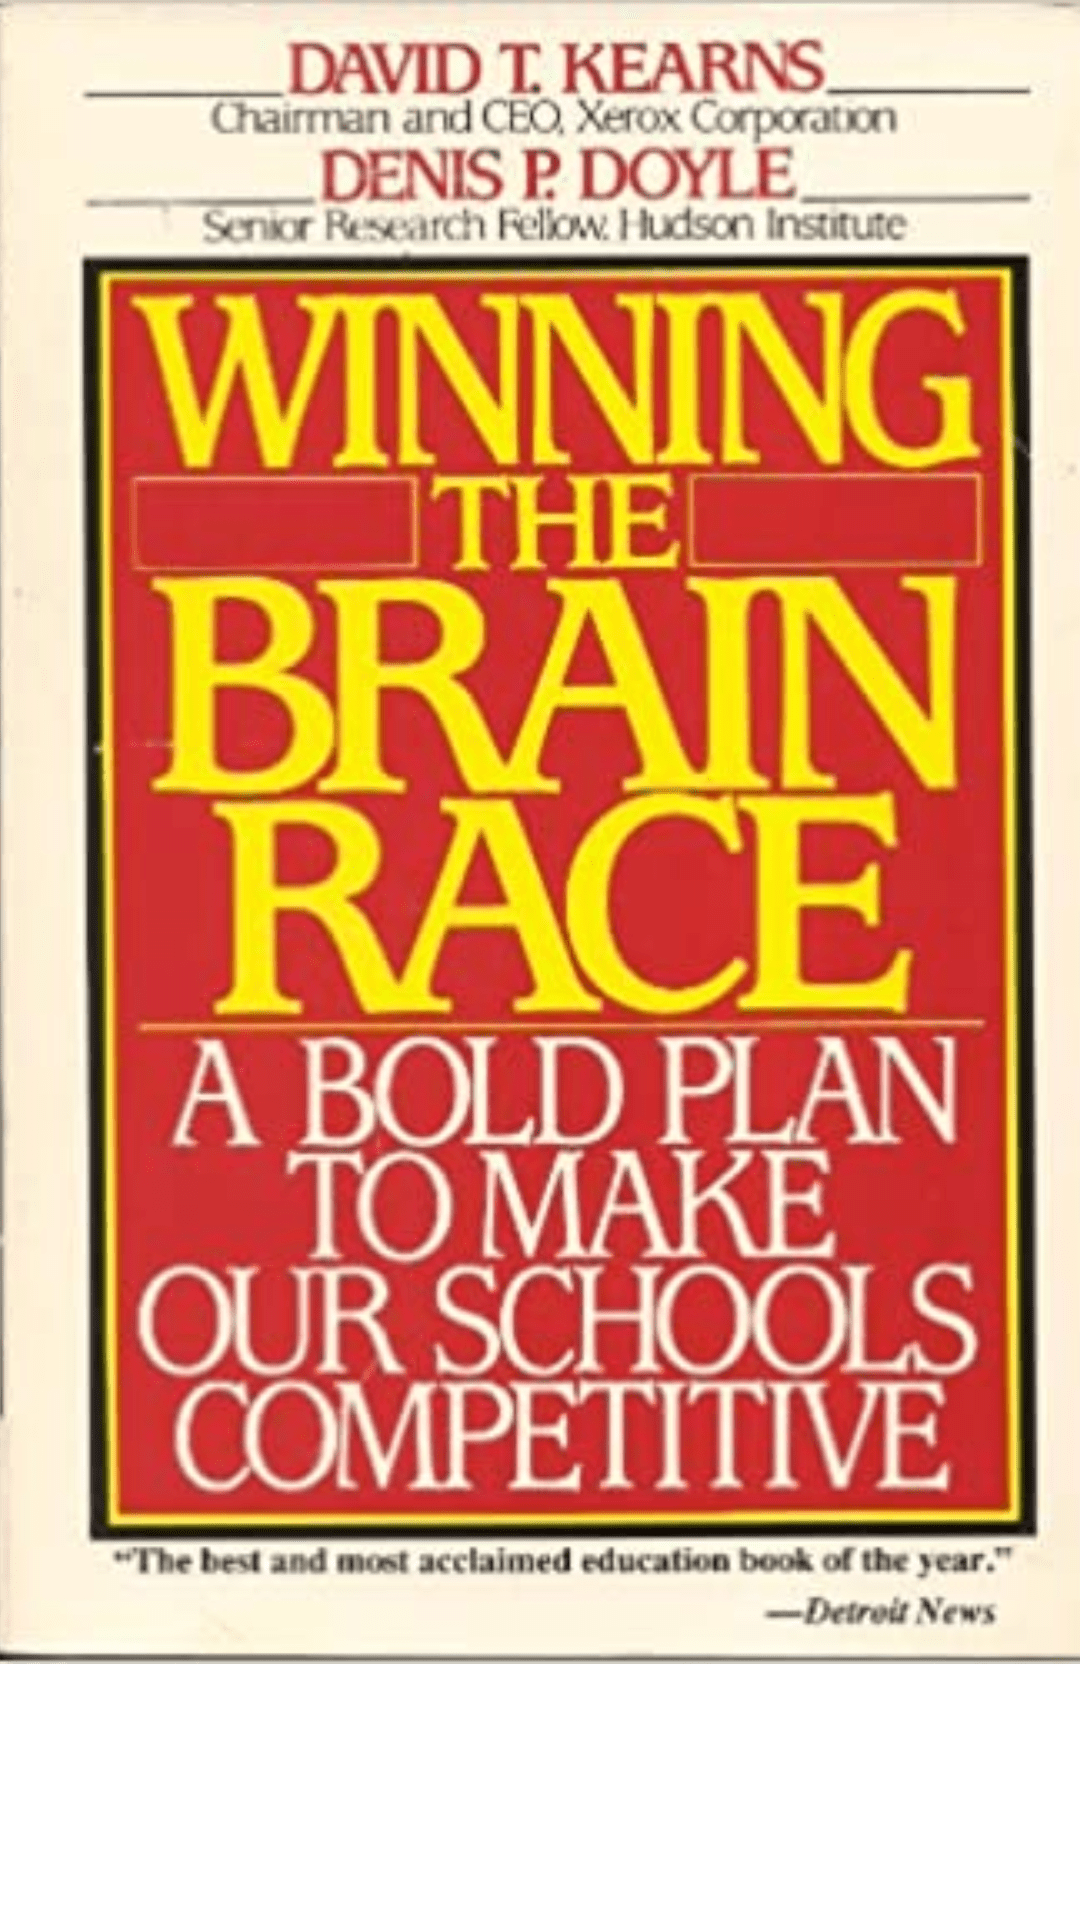 Winning the Brain Race: A Bold Plan to Make Our Schools Competitive